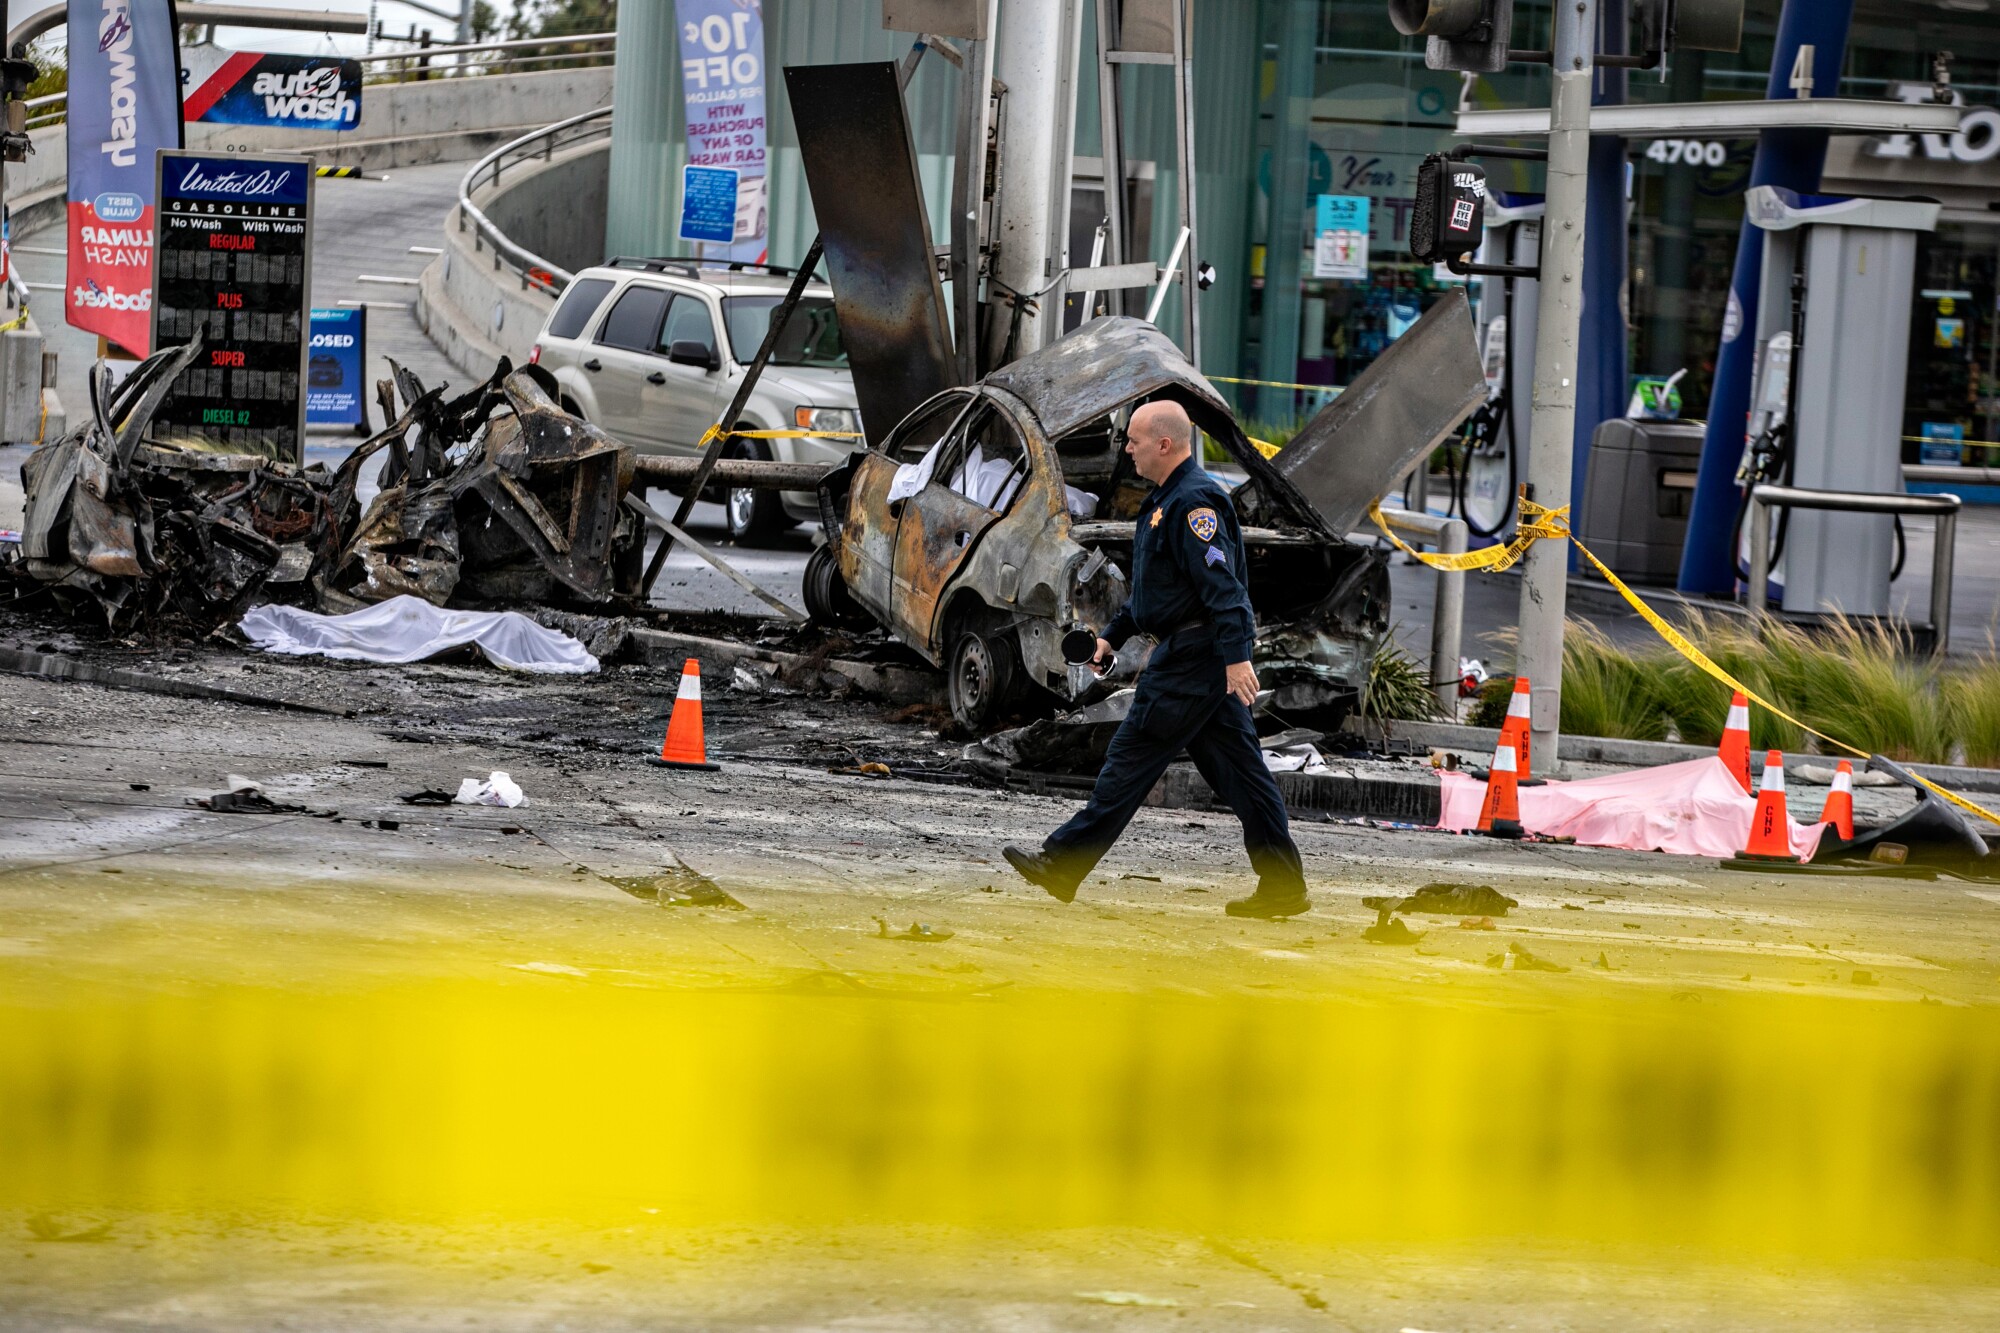 A law enforcement official walks by the scene of a deadly car crash.